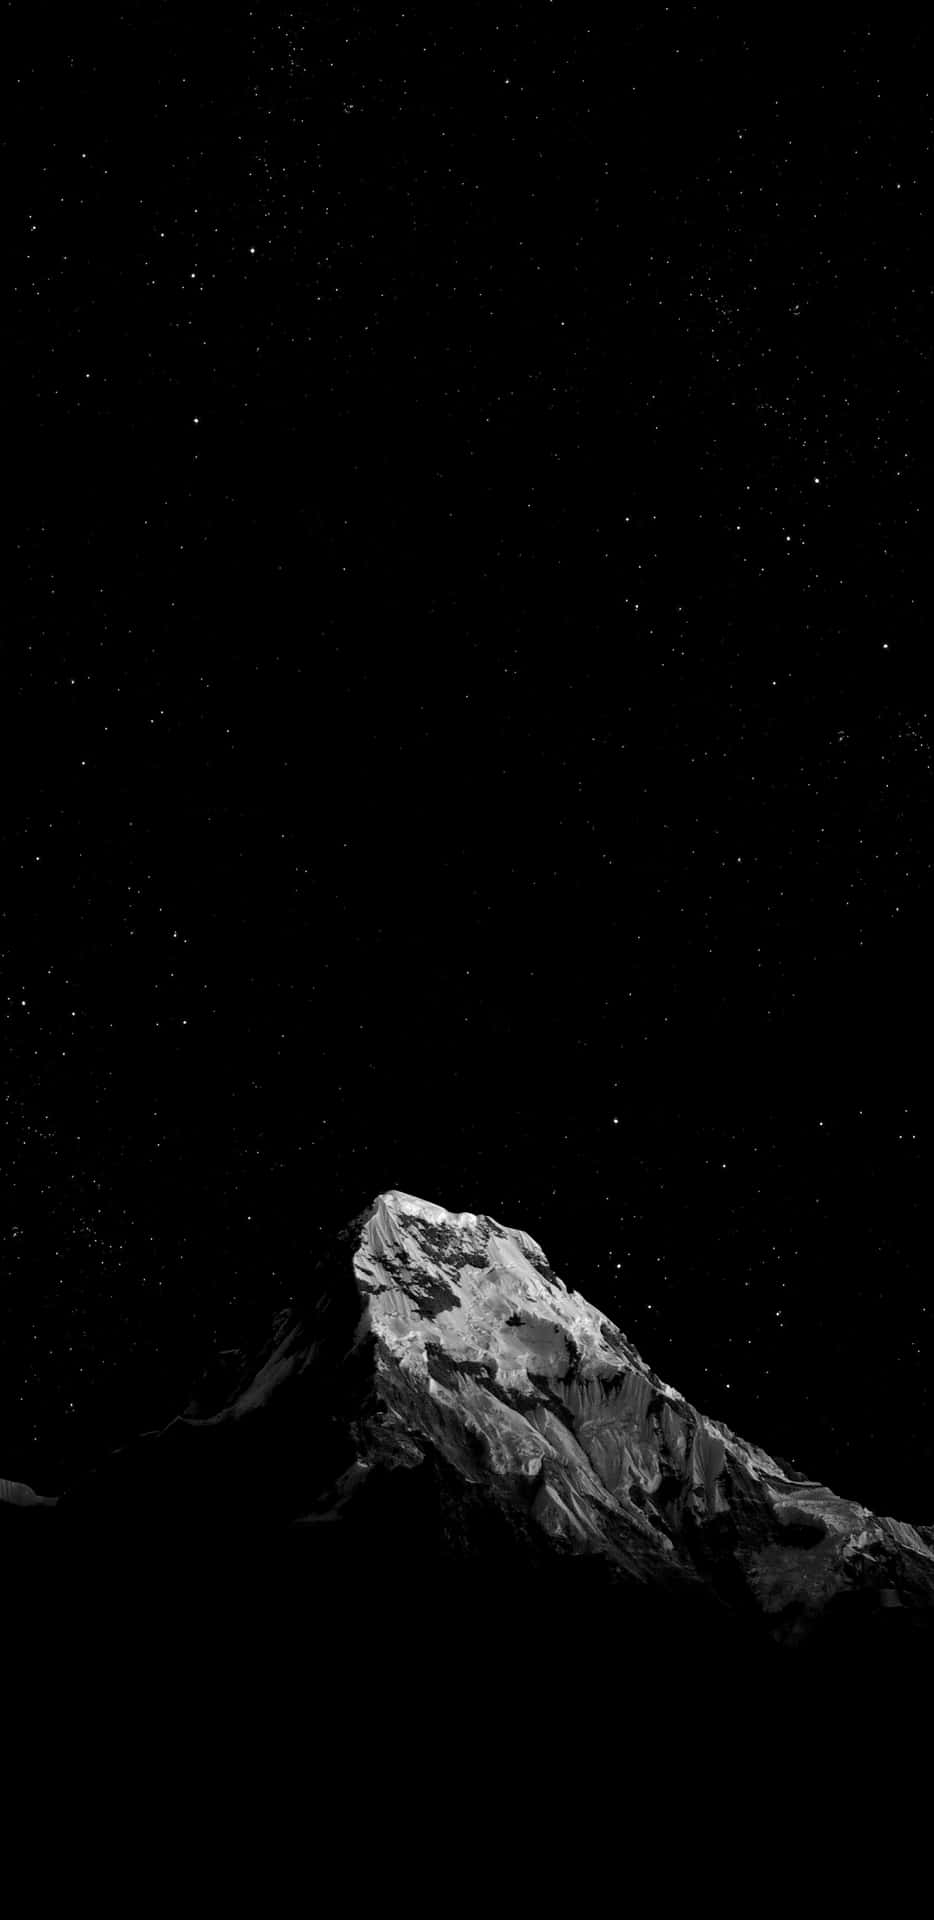 a mountain is shown in the night sky